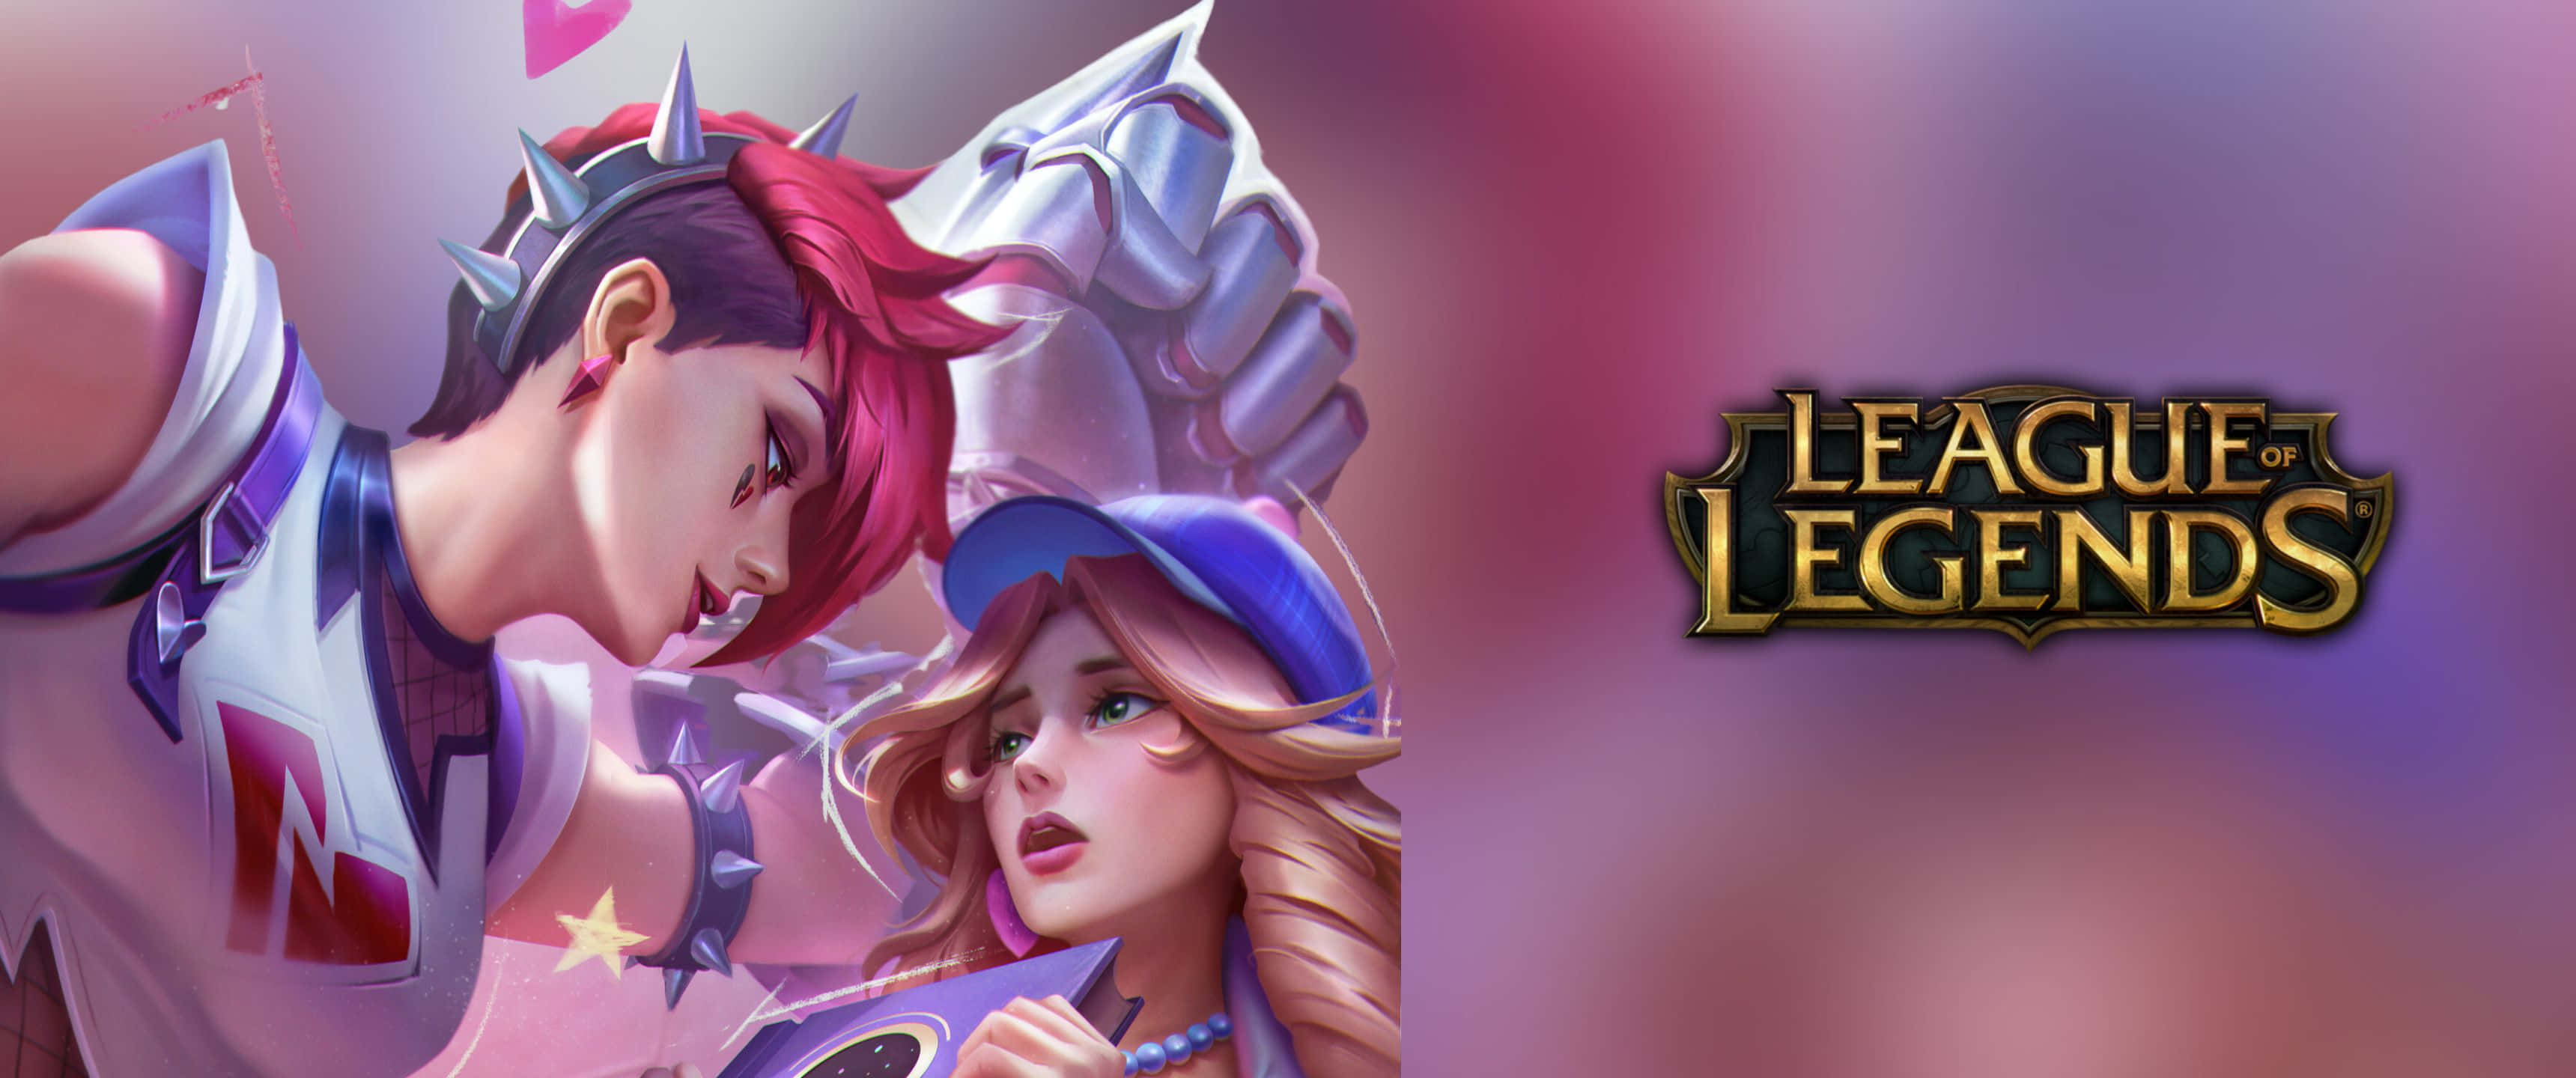 Caitlyn And Vi 3440x1440p League Of Legends Background